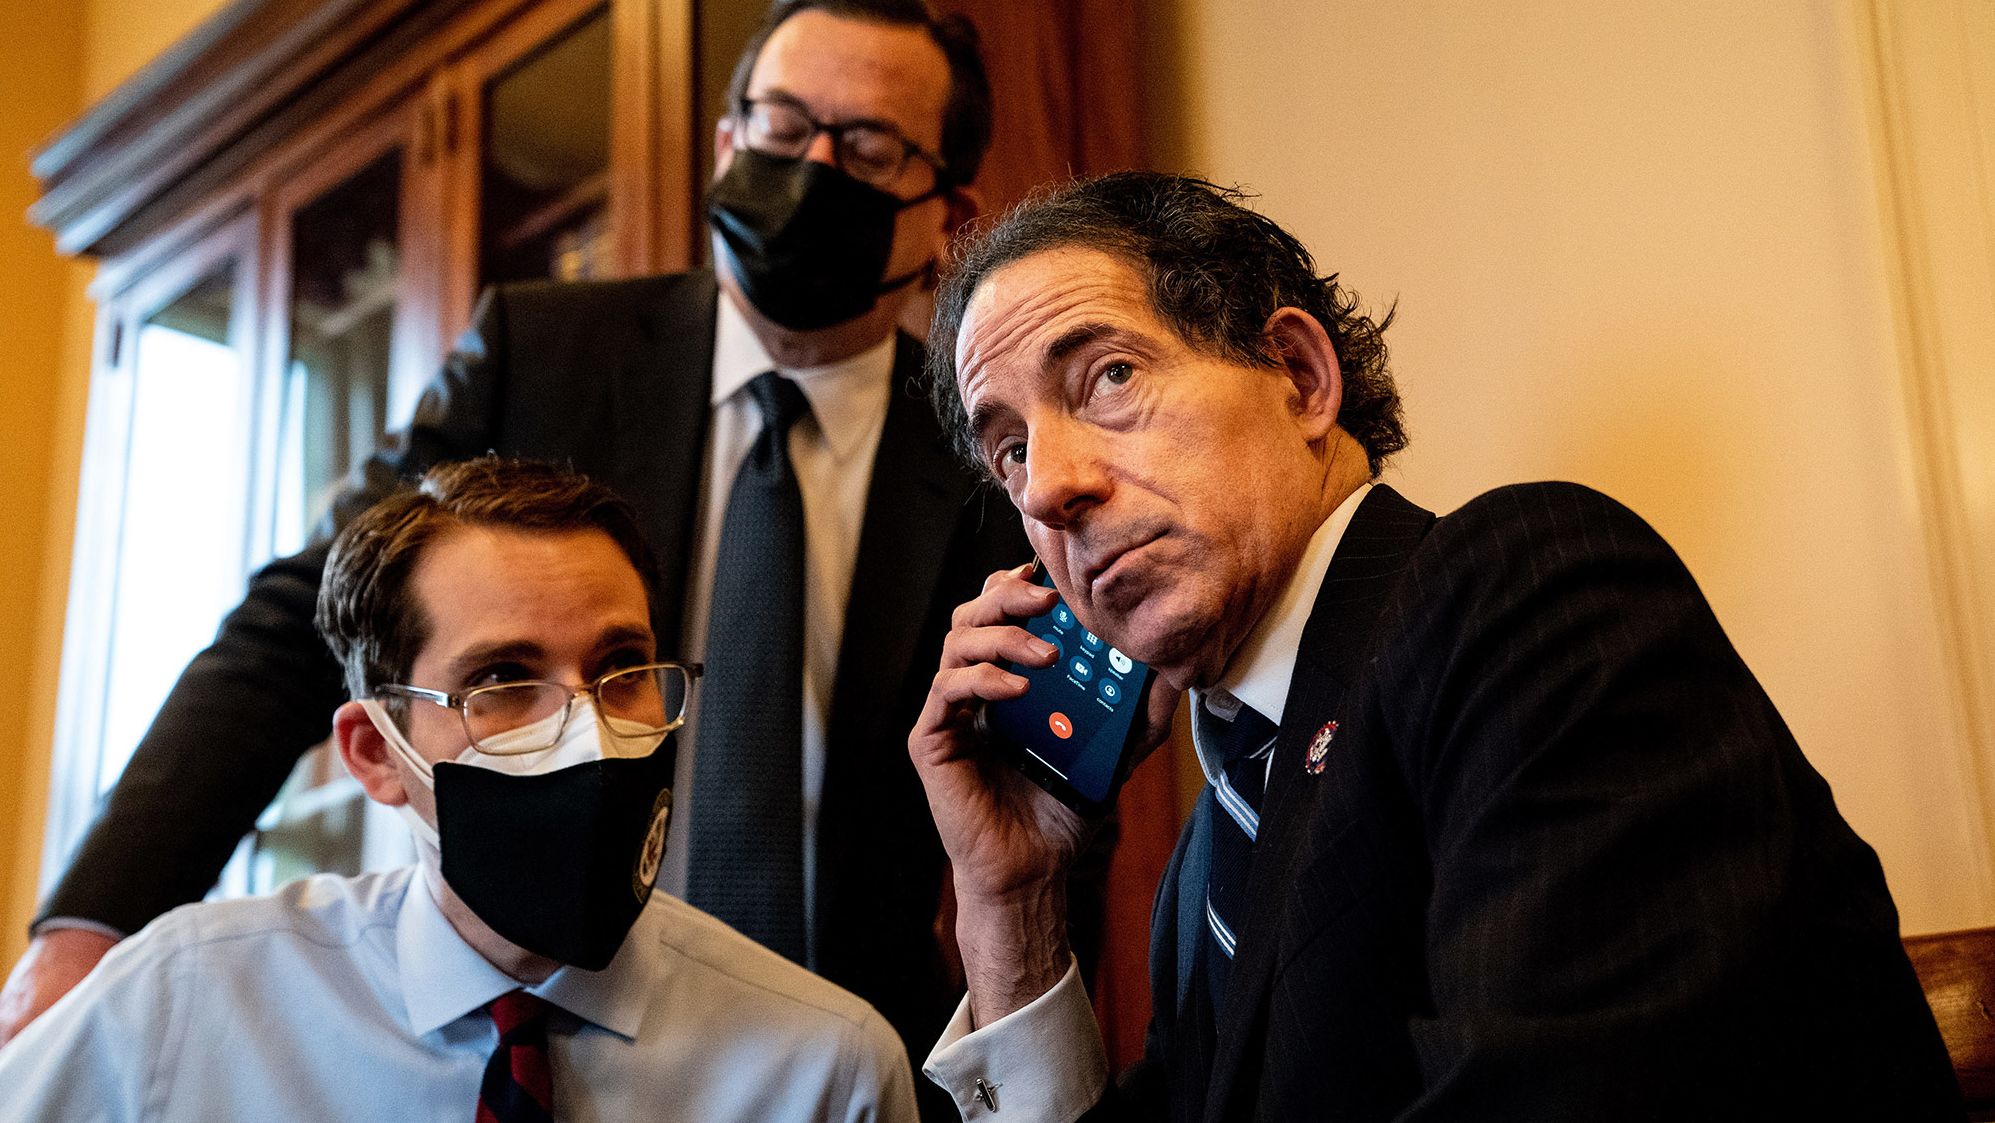 US Rep. Jamie Raskin, the lead impeachment manager, talks on the phone before the start of Saturday's proceedings.